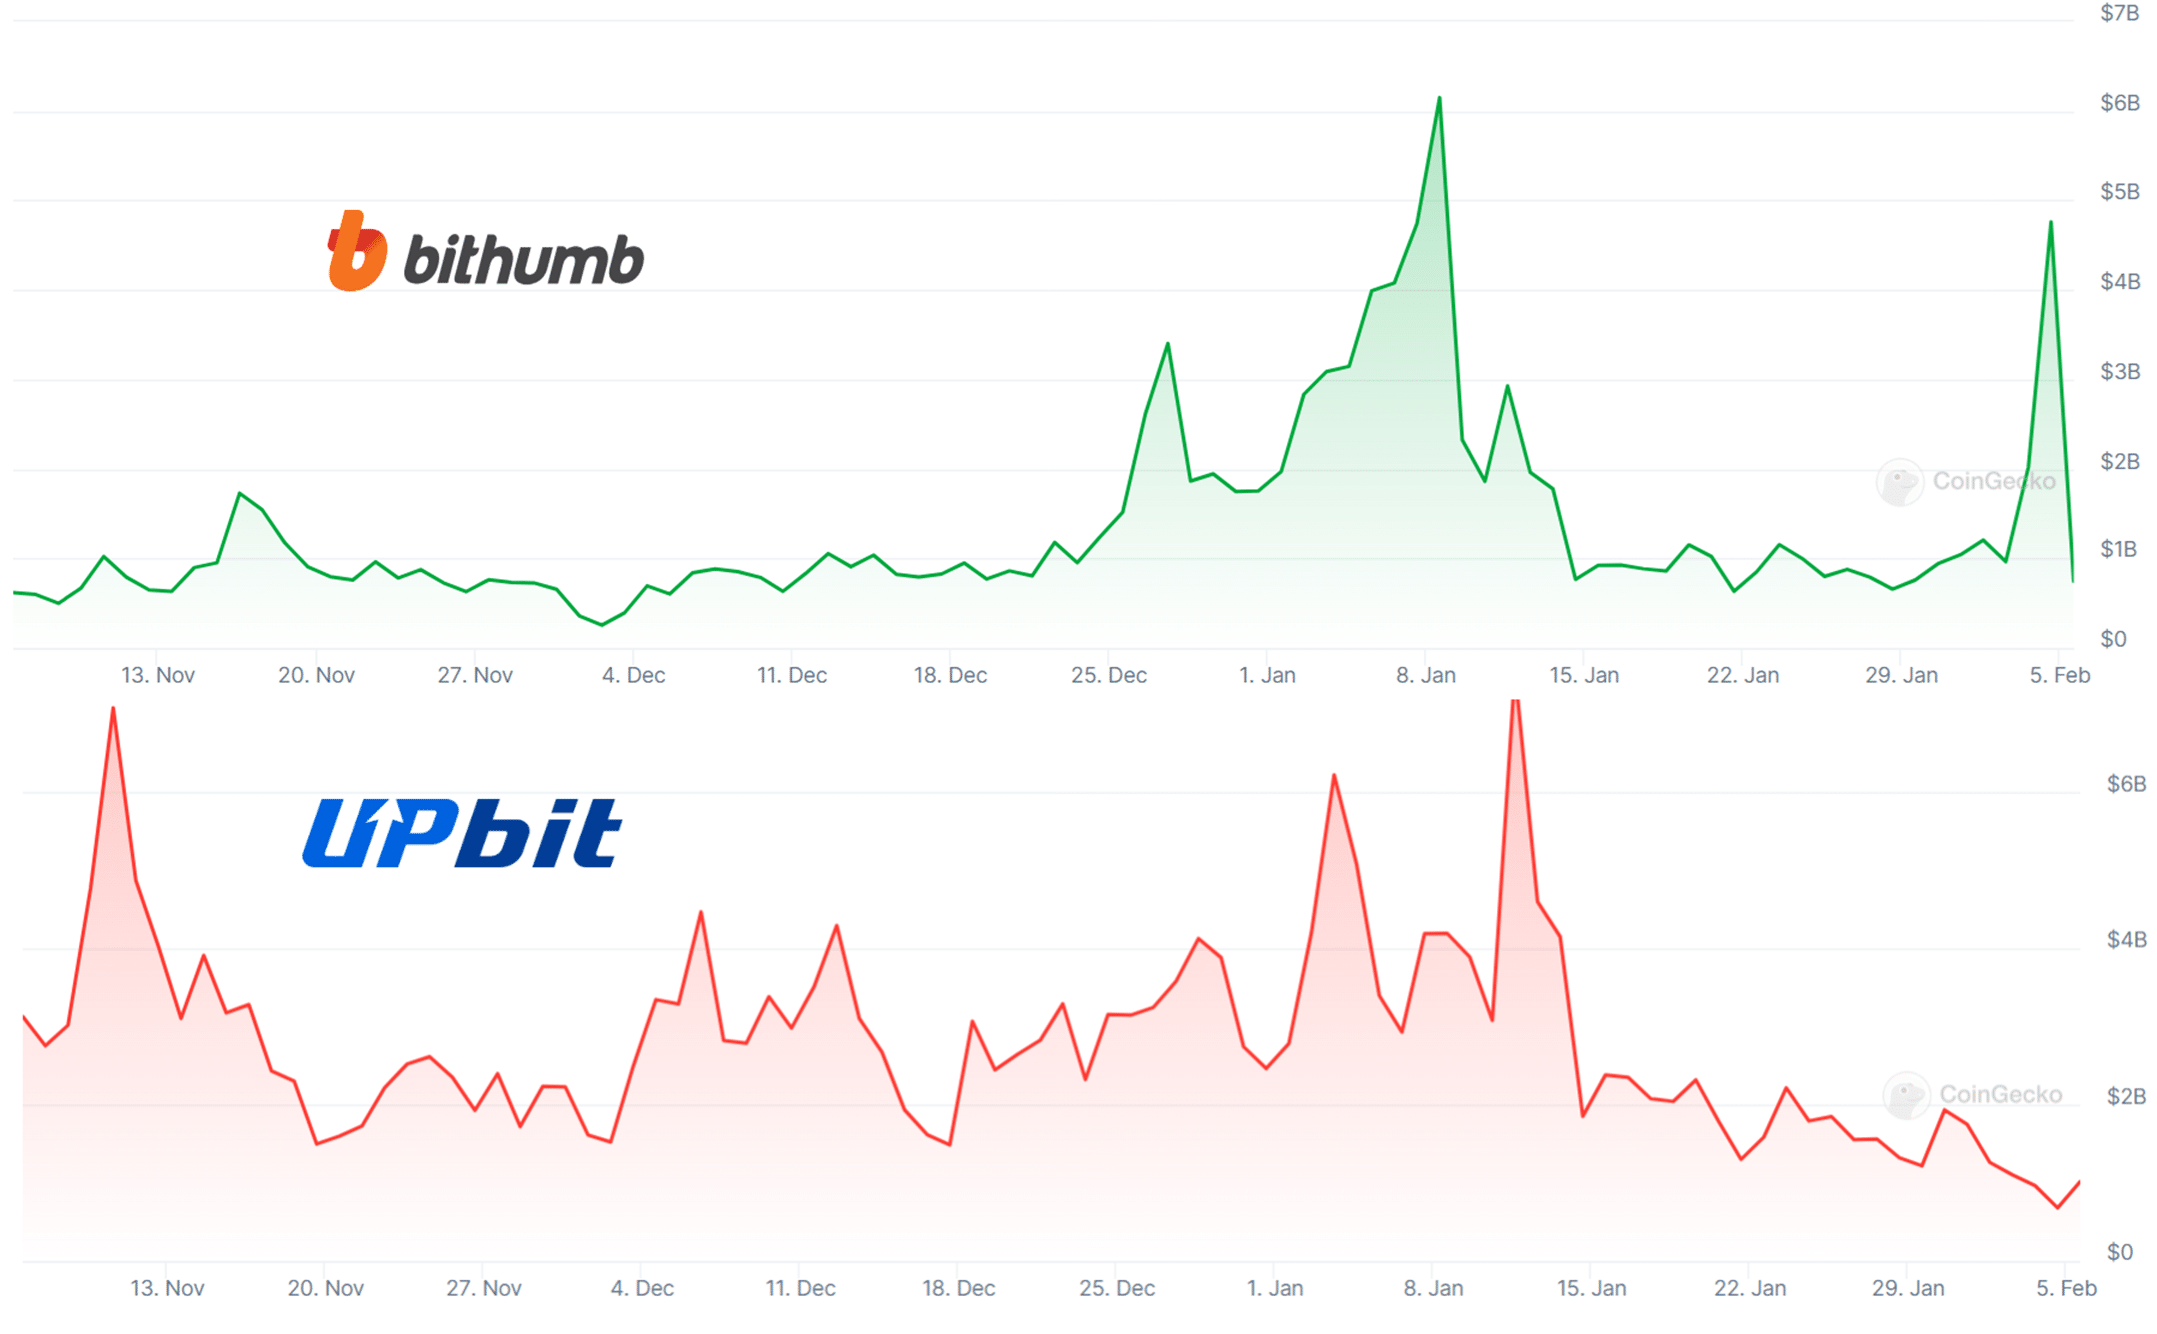 A graph showing trading volumes on the Bithumb and Upbit crypto exchanges over the past three months.